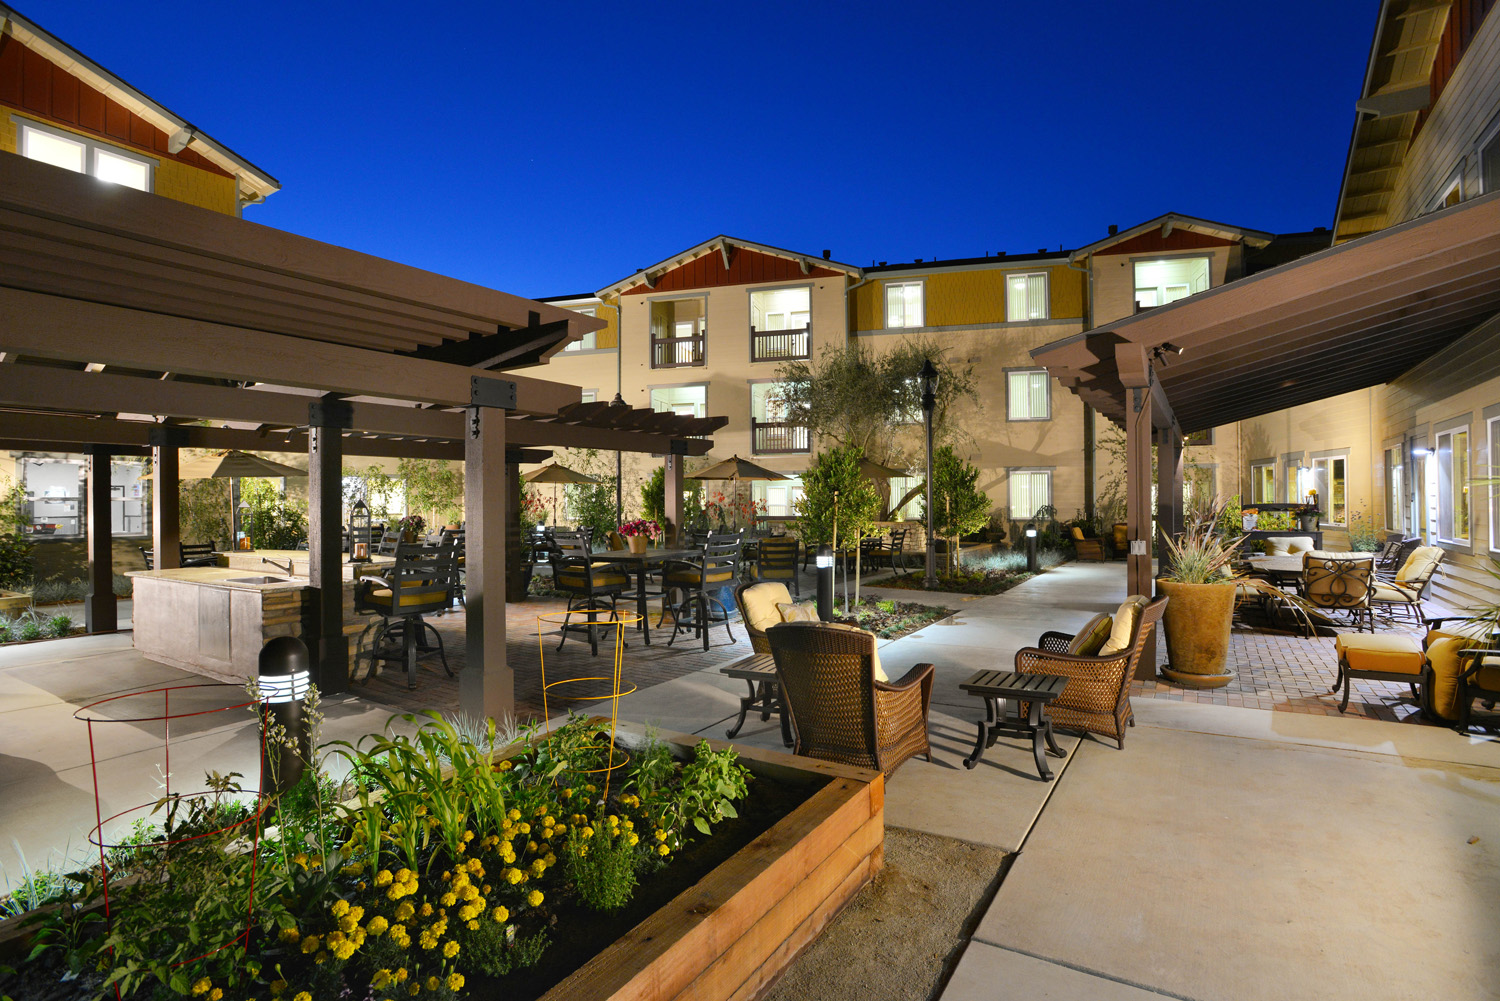 Outdoor amenities include a patio area with a BBQ center, relaxing fountain and 